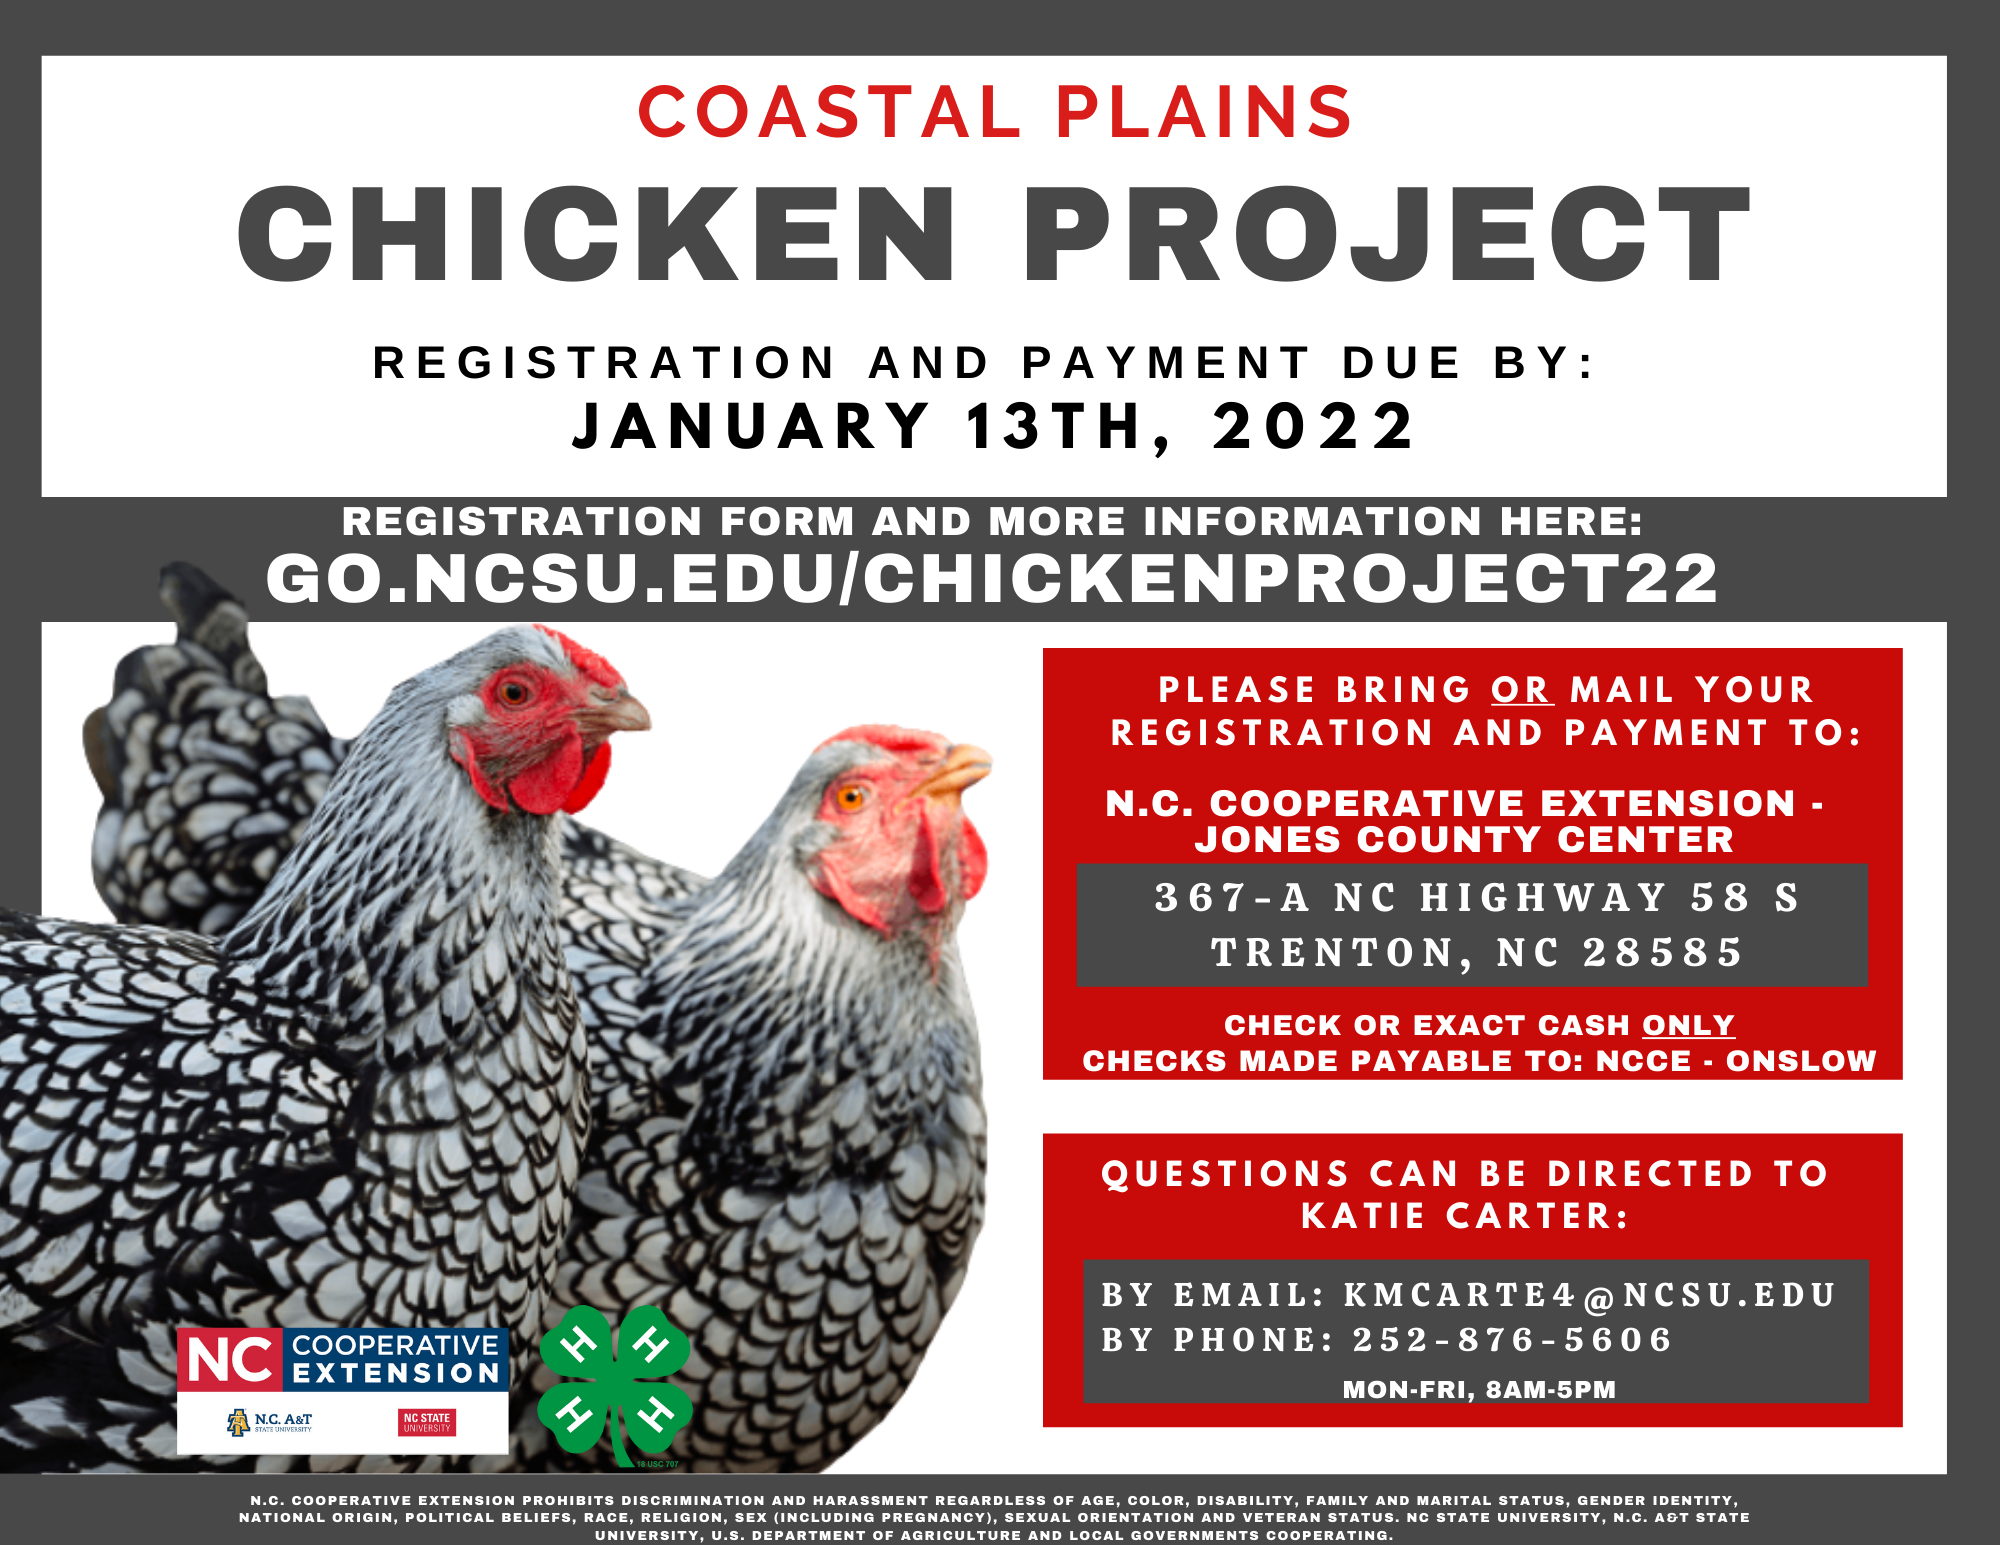 Coastal Plains Chicken Project Registration and Payment Due Jan. 13th 2022